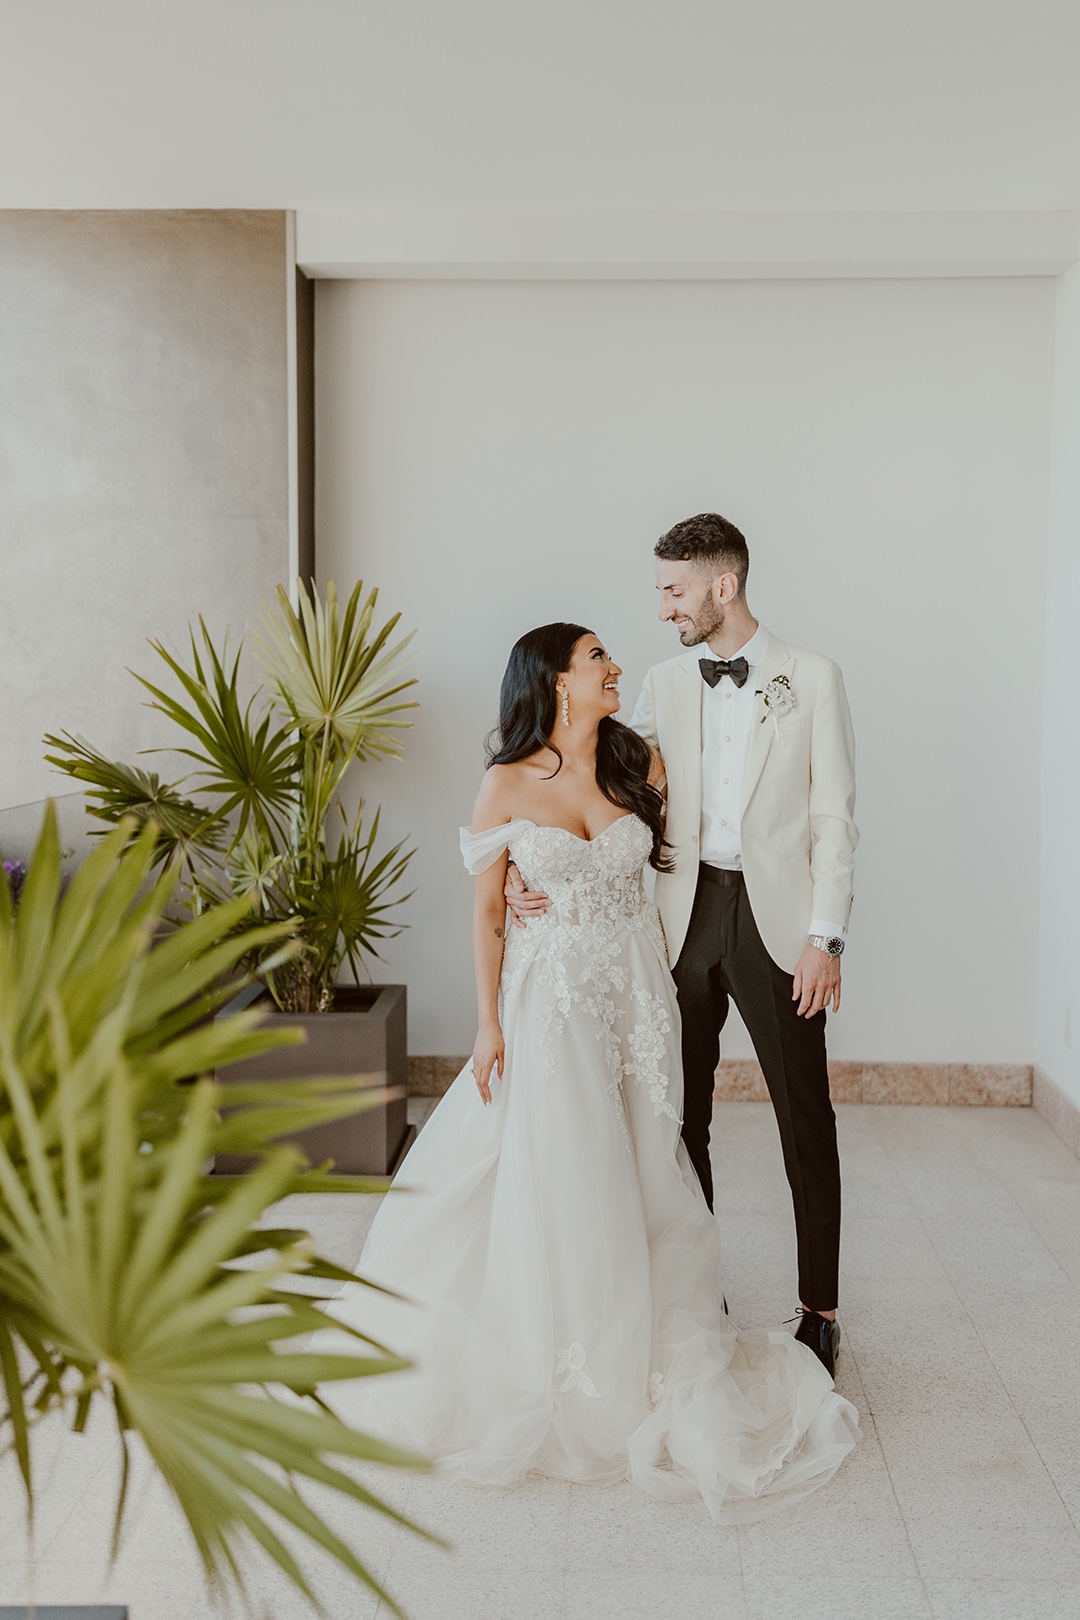 Elegant and classic bride and groom fashion 